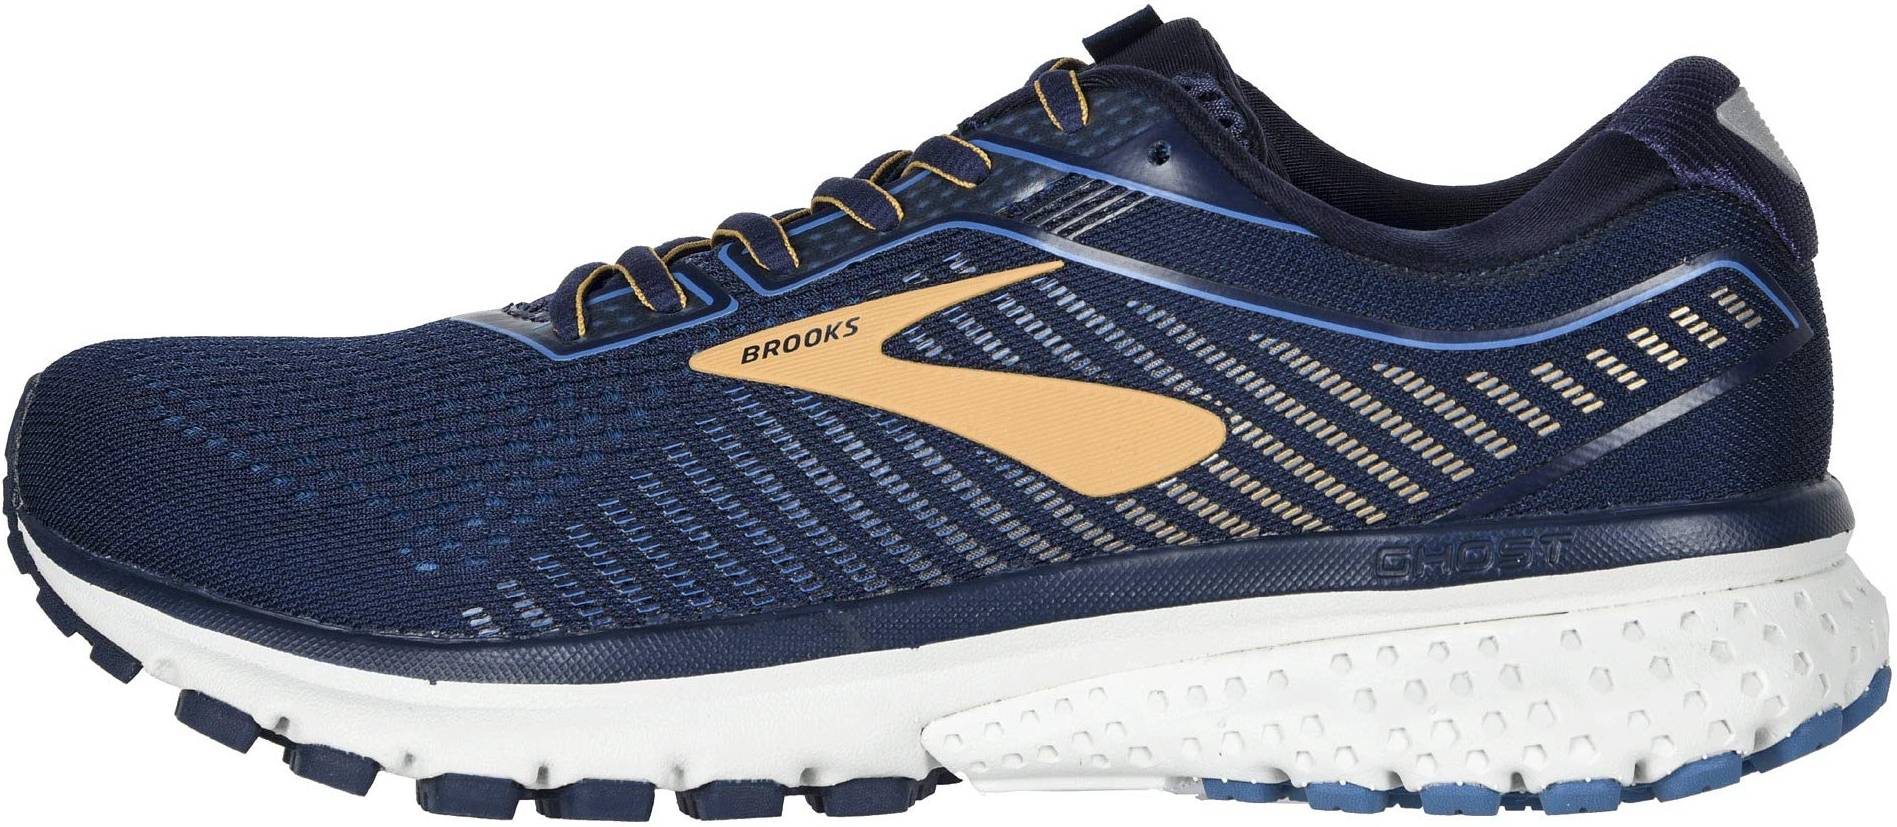 Save 27% on Narrow Running Shoes (49 